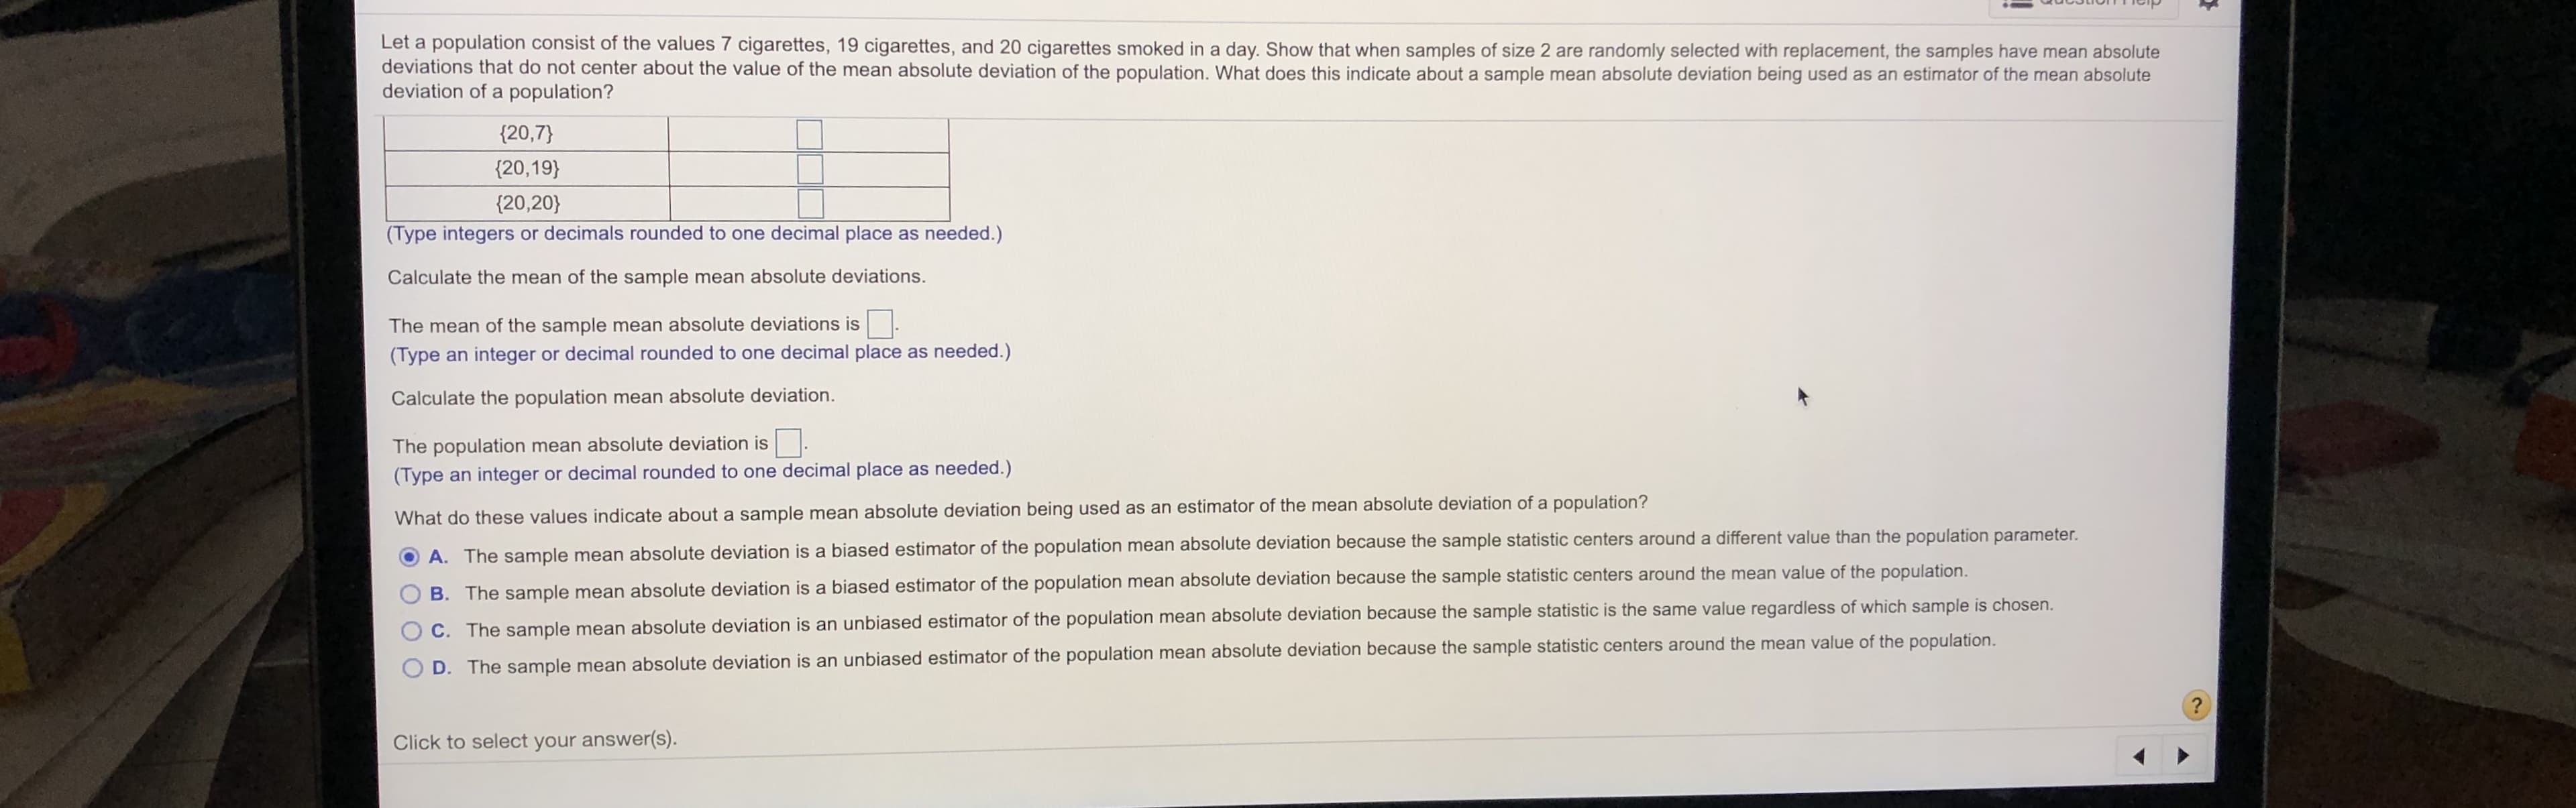 Let a population consist of the values 7 cigarettes, 19 cigarettes, and 20 cigarettes smoked in a day. Show that when samples of size 2 are randomly selected with replacement, the samples have mean absolute
deviations that do not center about the value of the mean absolute deviation of the population. What does this indicate about a sample mean absolute deviation being used as an estimator of the mean absolute
deviation of a population?
{20,7}
{20,19}
{20,20}
(Type integers or decimals rounded to one decimal place as needed.)
Calculate the mean of the sample mean absolute deviations.
The mean of the sample mean absolute deviations is
(Type an integer or decimal rounded to one decimal place as needed.)
Calculate the population mean absolute deviation.
The population mean absolute deviation is
(Type an integer or decimal rounded to one decimal place as needed.)
What do these values indicate about a sample mean absolute deviation being used as an estimator of the mean absolute deviation of a population?
A. The sample mean absolute deviation is a biased estimator of the population mean absolute deviation because the sample statistic centers around a different value than the population parameter.
B. The sample mean absolute deviation is a biased estimator of the population mean absolute deviation because the sample statistic centers around the mean value of the population.
C. The sample mean absolute deviation is an unbiased estimator of the population mean absolute deviation because the sample statistic is the same value regardless of which sample is chosen.
D. The sample mean absolute deviation is an unbiased estimator of the population mean absolute deviation because the sample statistic centers around the mean value of the population.
Click to select your answer(s).
